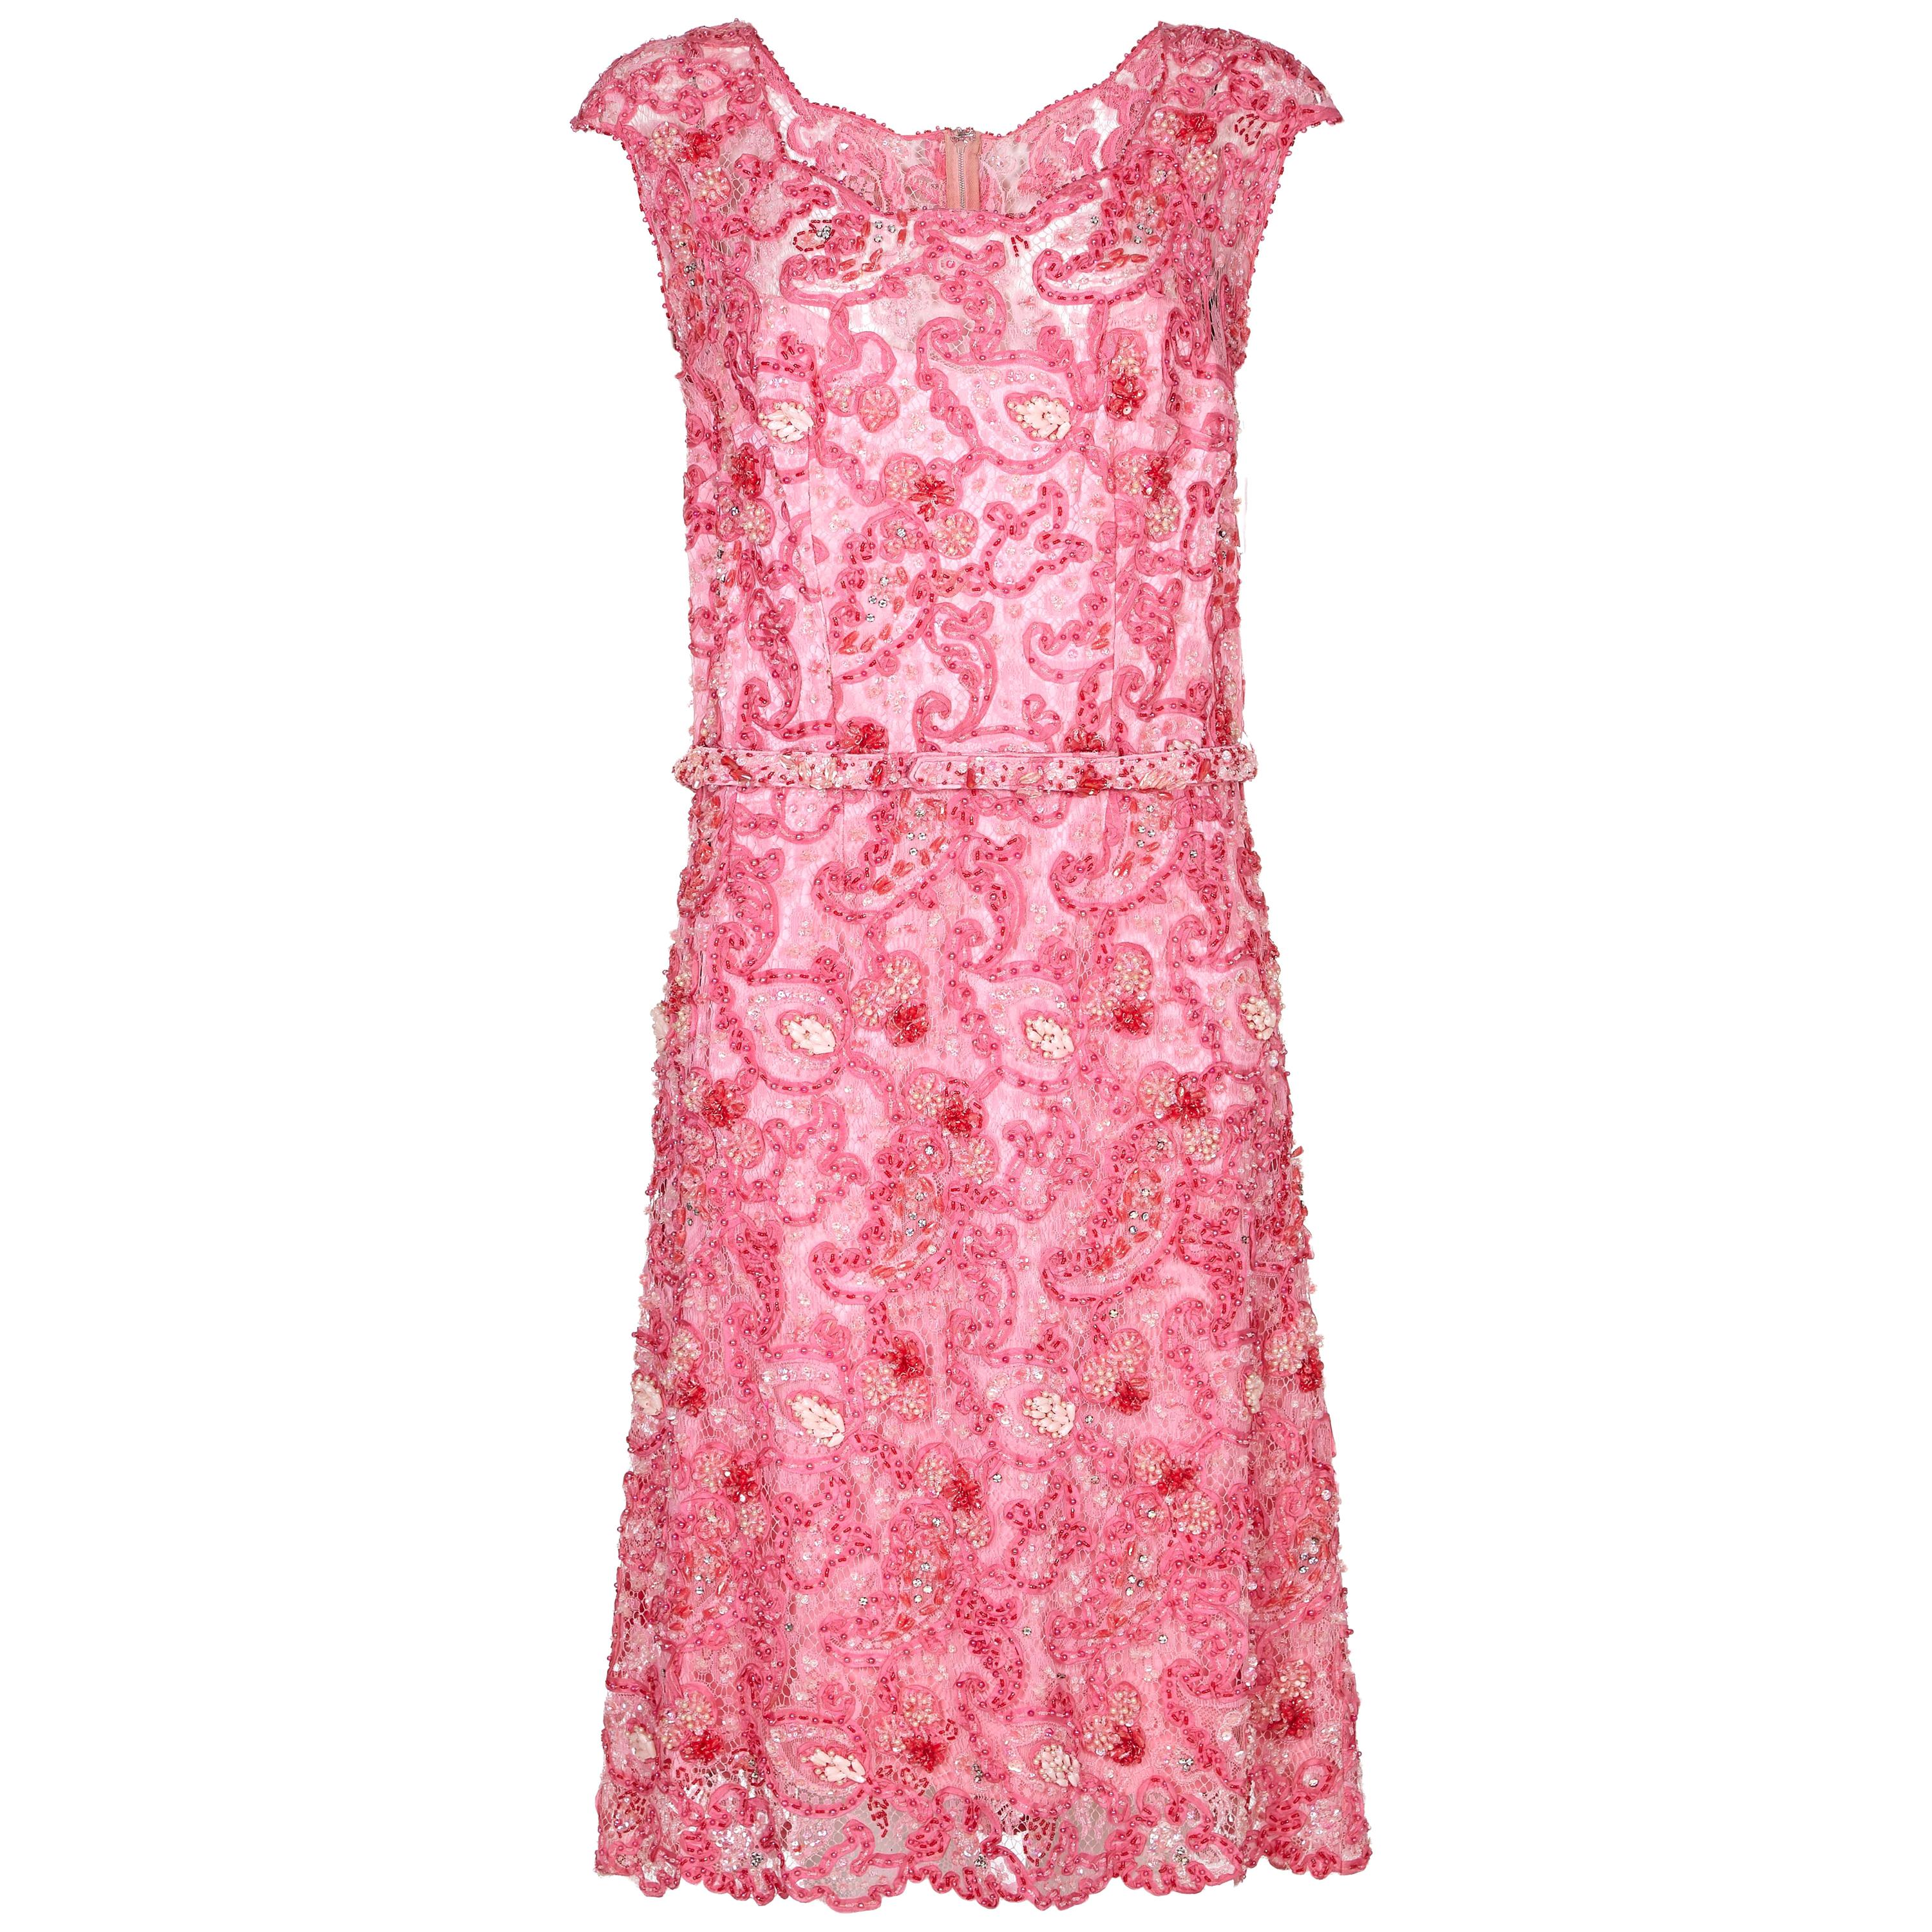 1960s Norman Hartnell Couture Pink Beaded Dress Owned by Dame Barbara ...